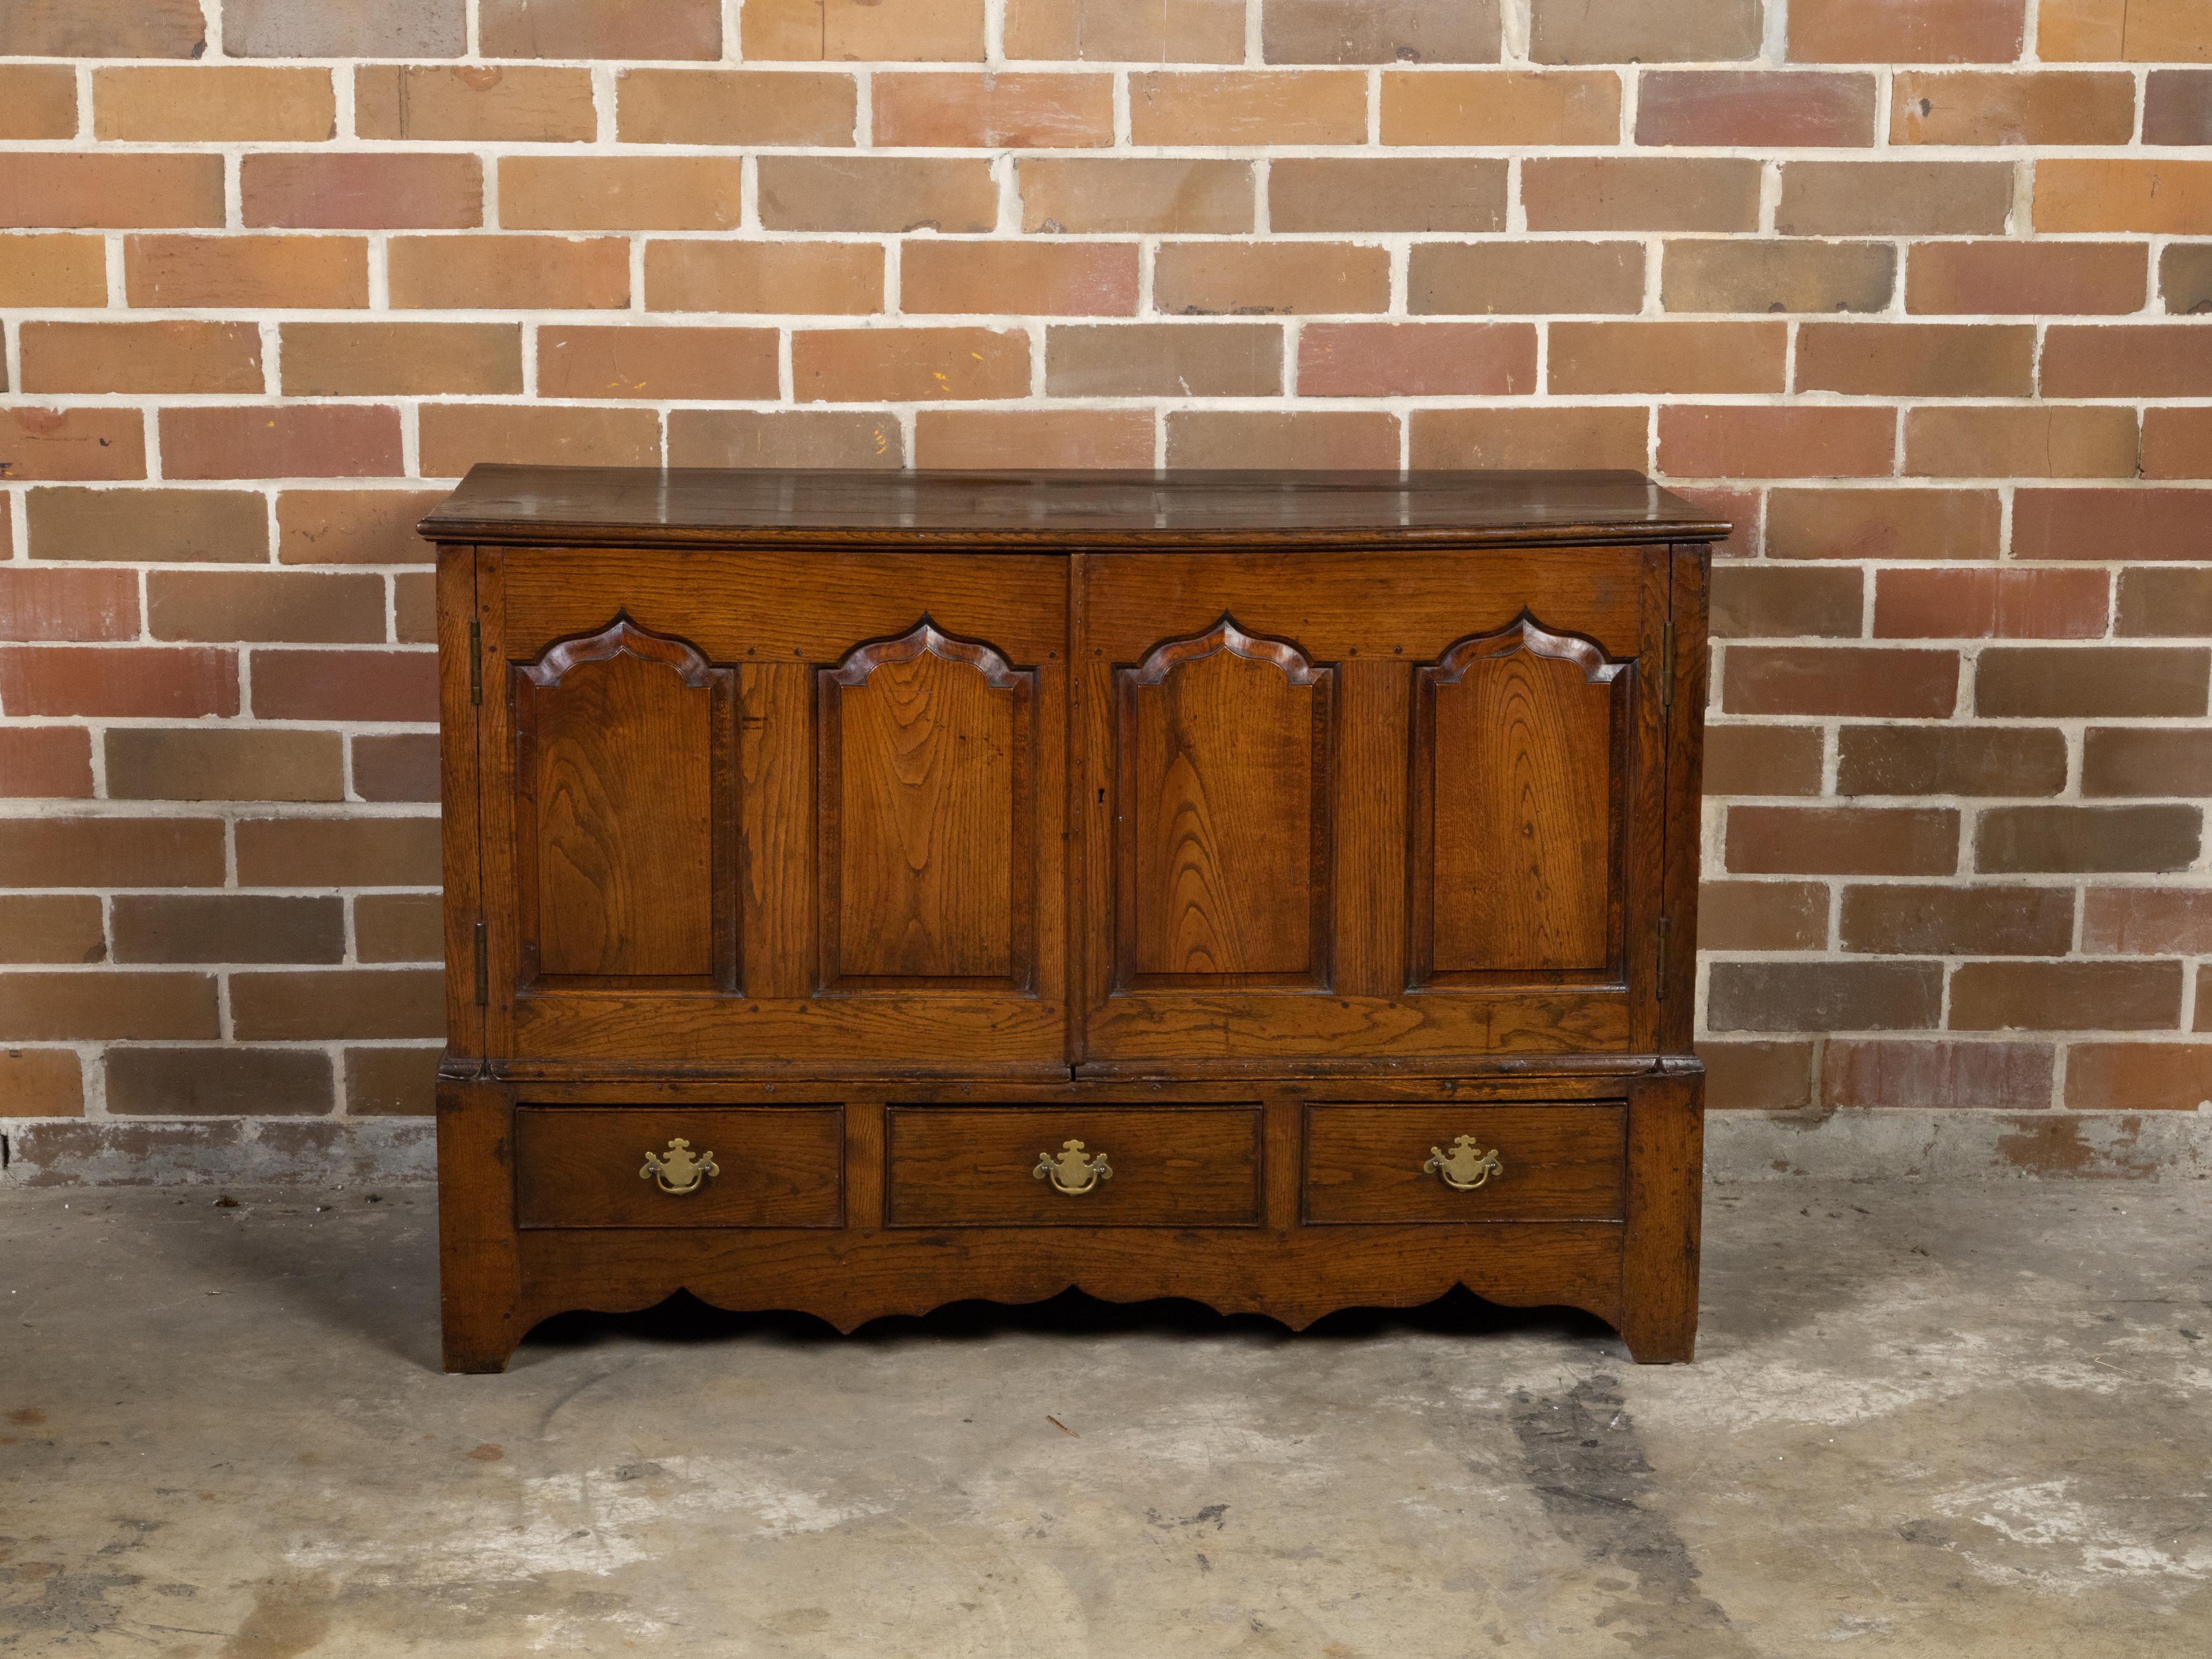 An English Georgian period small oak buffet from the 18th century, with double doors, drawers, arching motifs and brass Chippendale style hardware. Created in England during the Georgian era in the 18th century, this small oak buffet features a